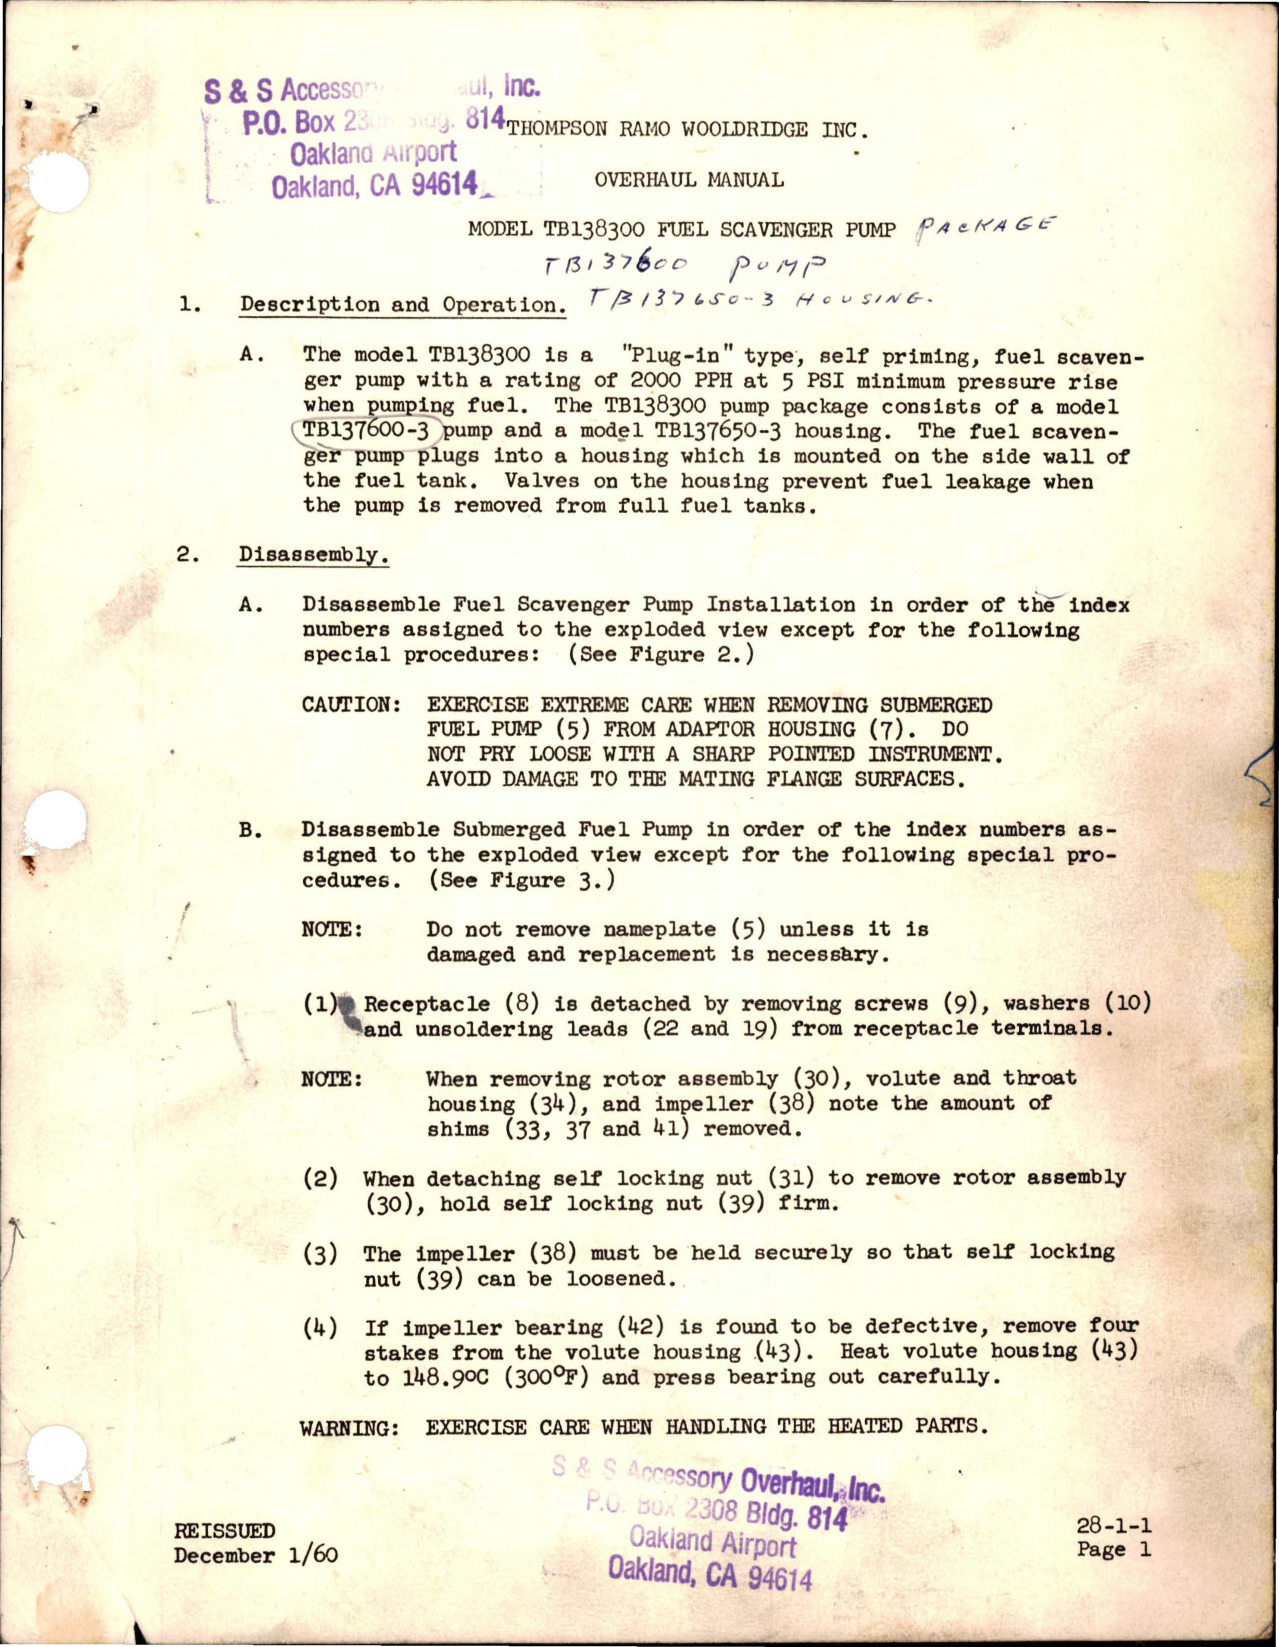 Sample page 1 from AirCorps Library document: Overhaul Manual for Fuel Scavenger Pump - Model TB138300